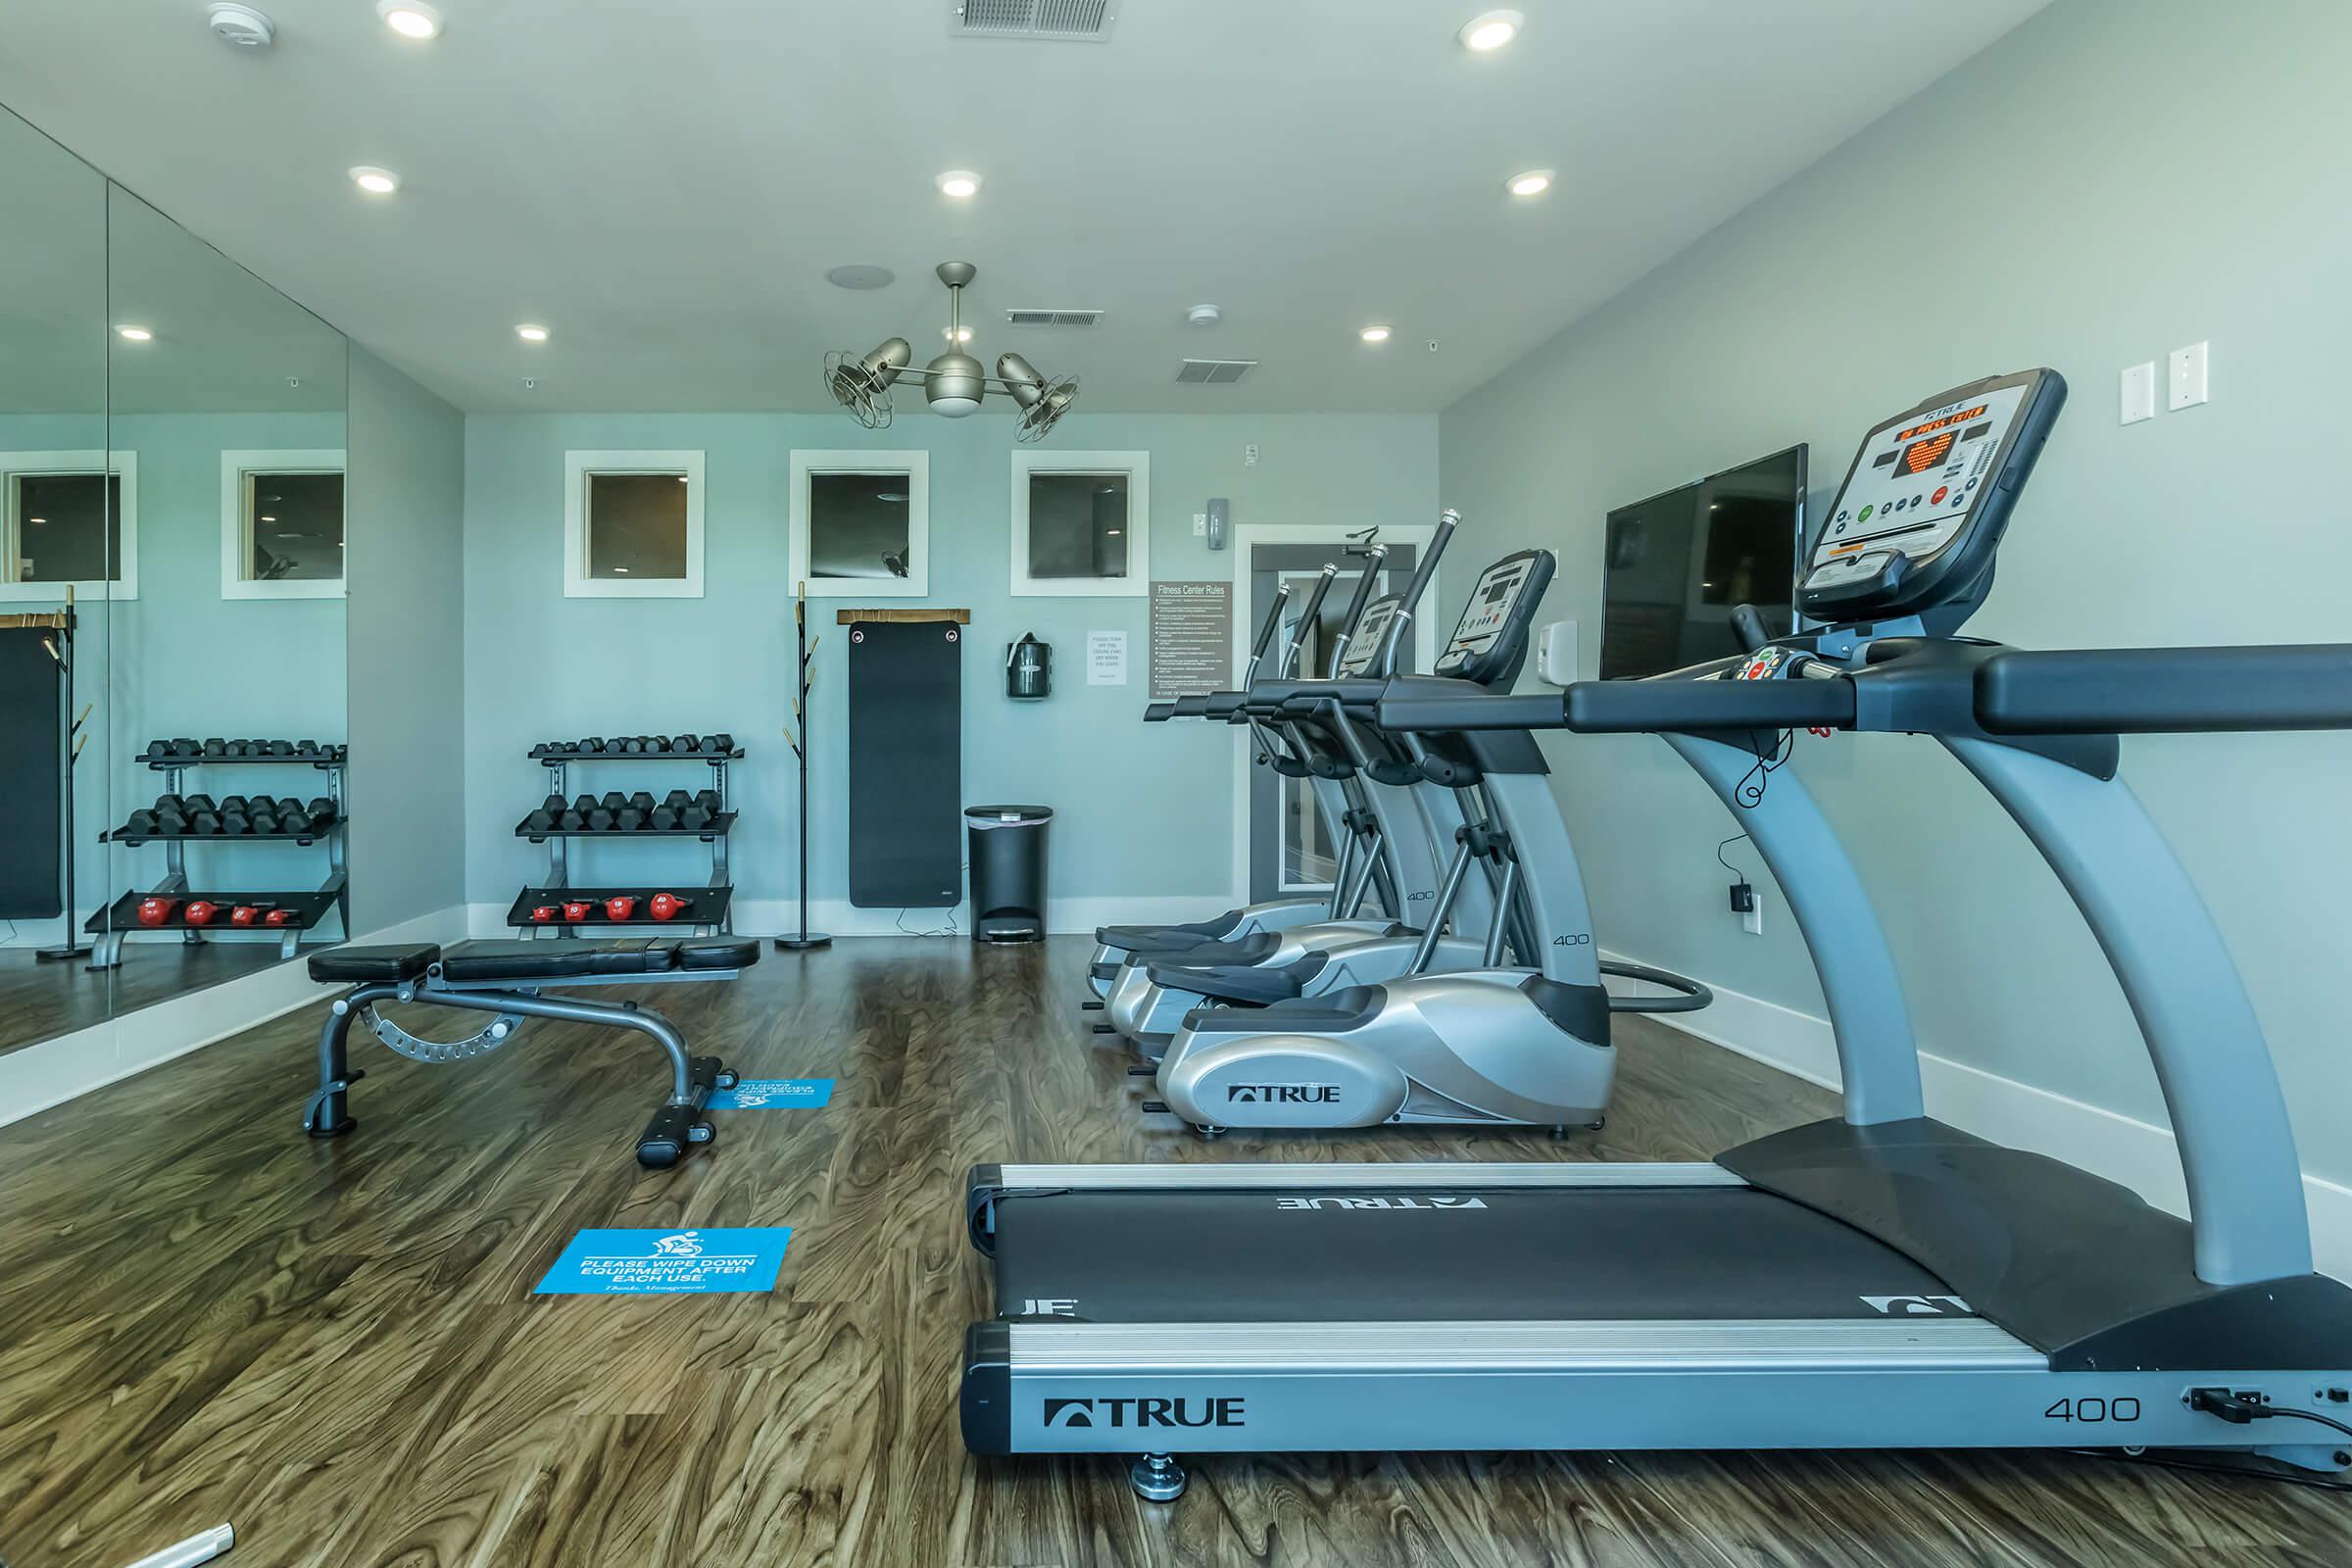 Stay fit at The Residence at Old Hickory Lake